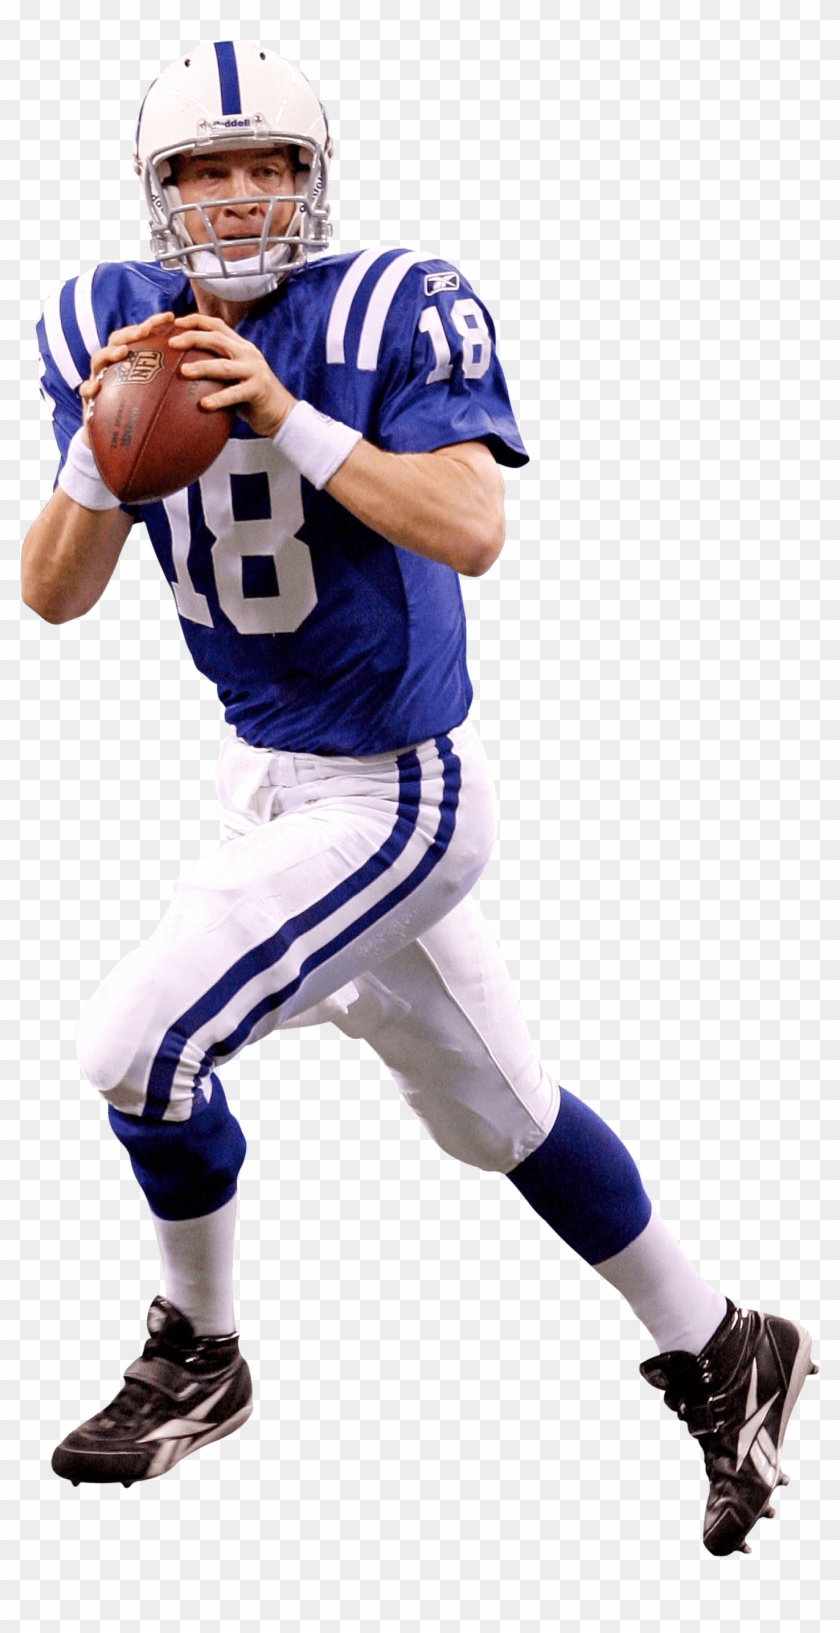 New York Giants Player - Indianapolis Colts Player Png Clipart #13256